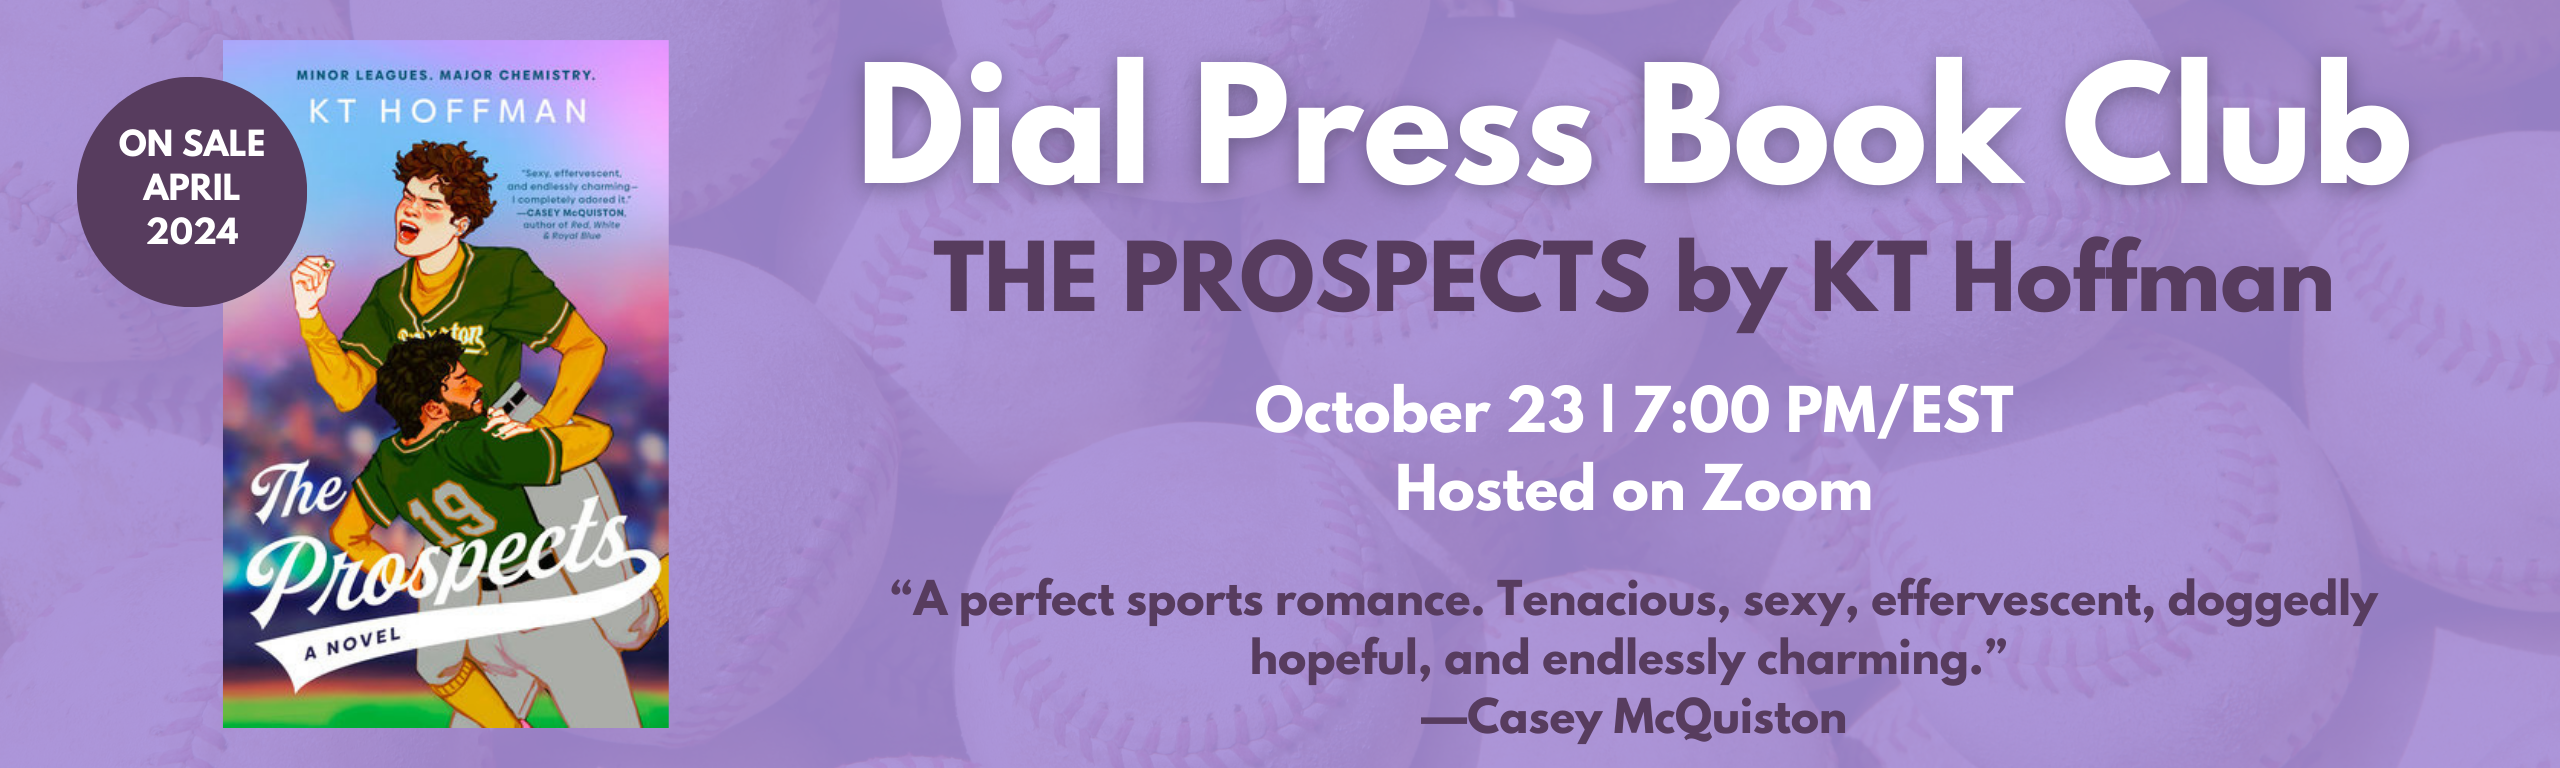 Dial Press Book Club: THE PROSPECTS